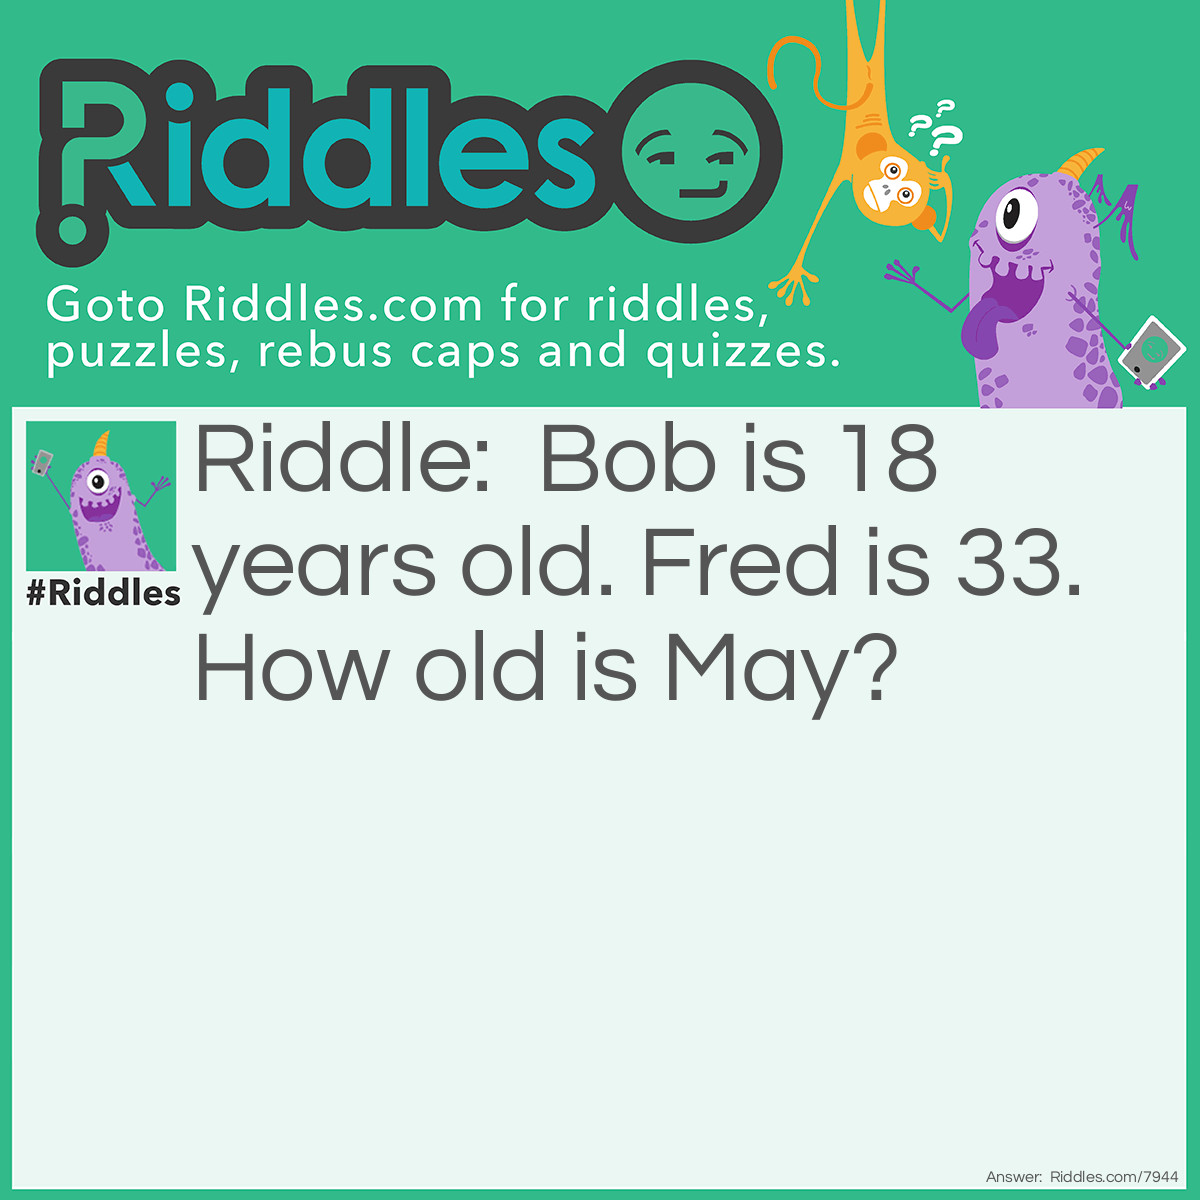 Riddle: Bob is 18 years old. Fred is 33. How old is May? Answer: May is 39. For each person, you need to know witch letter of the alphabet the letters in their name are. If you add the numbers, you get their age.